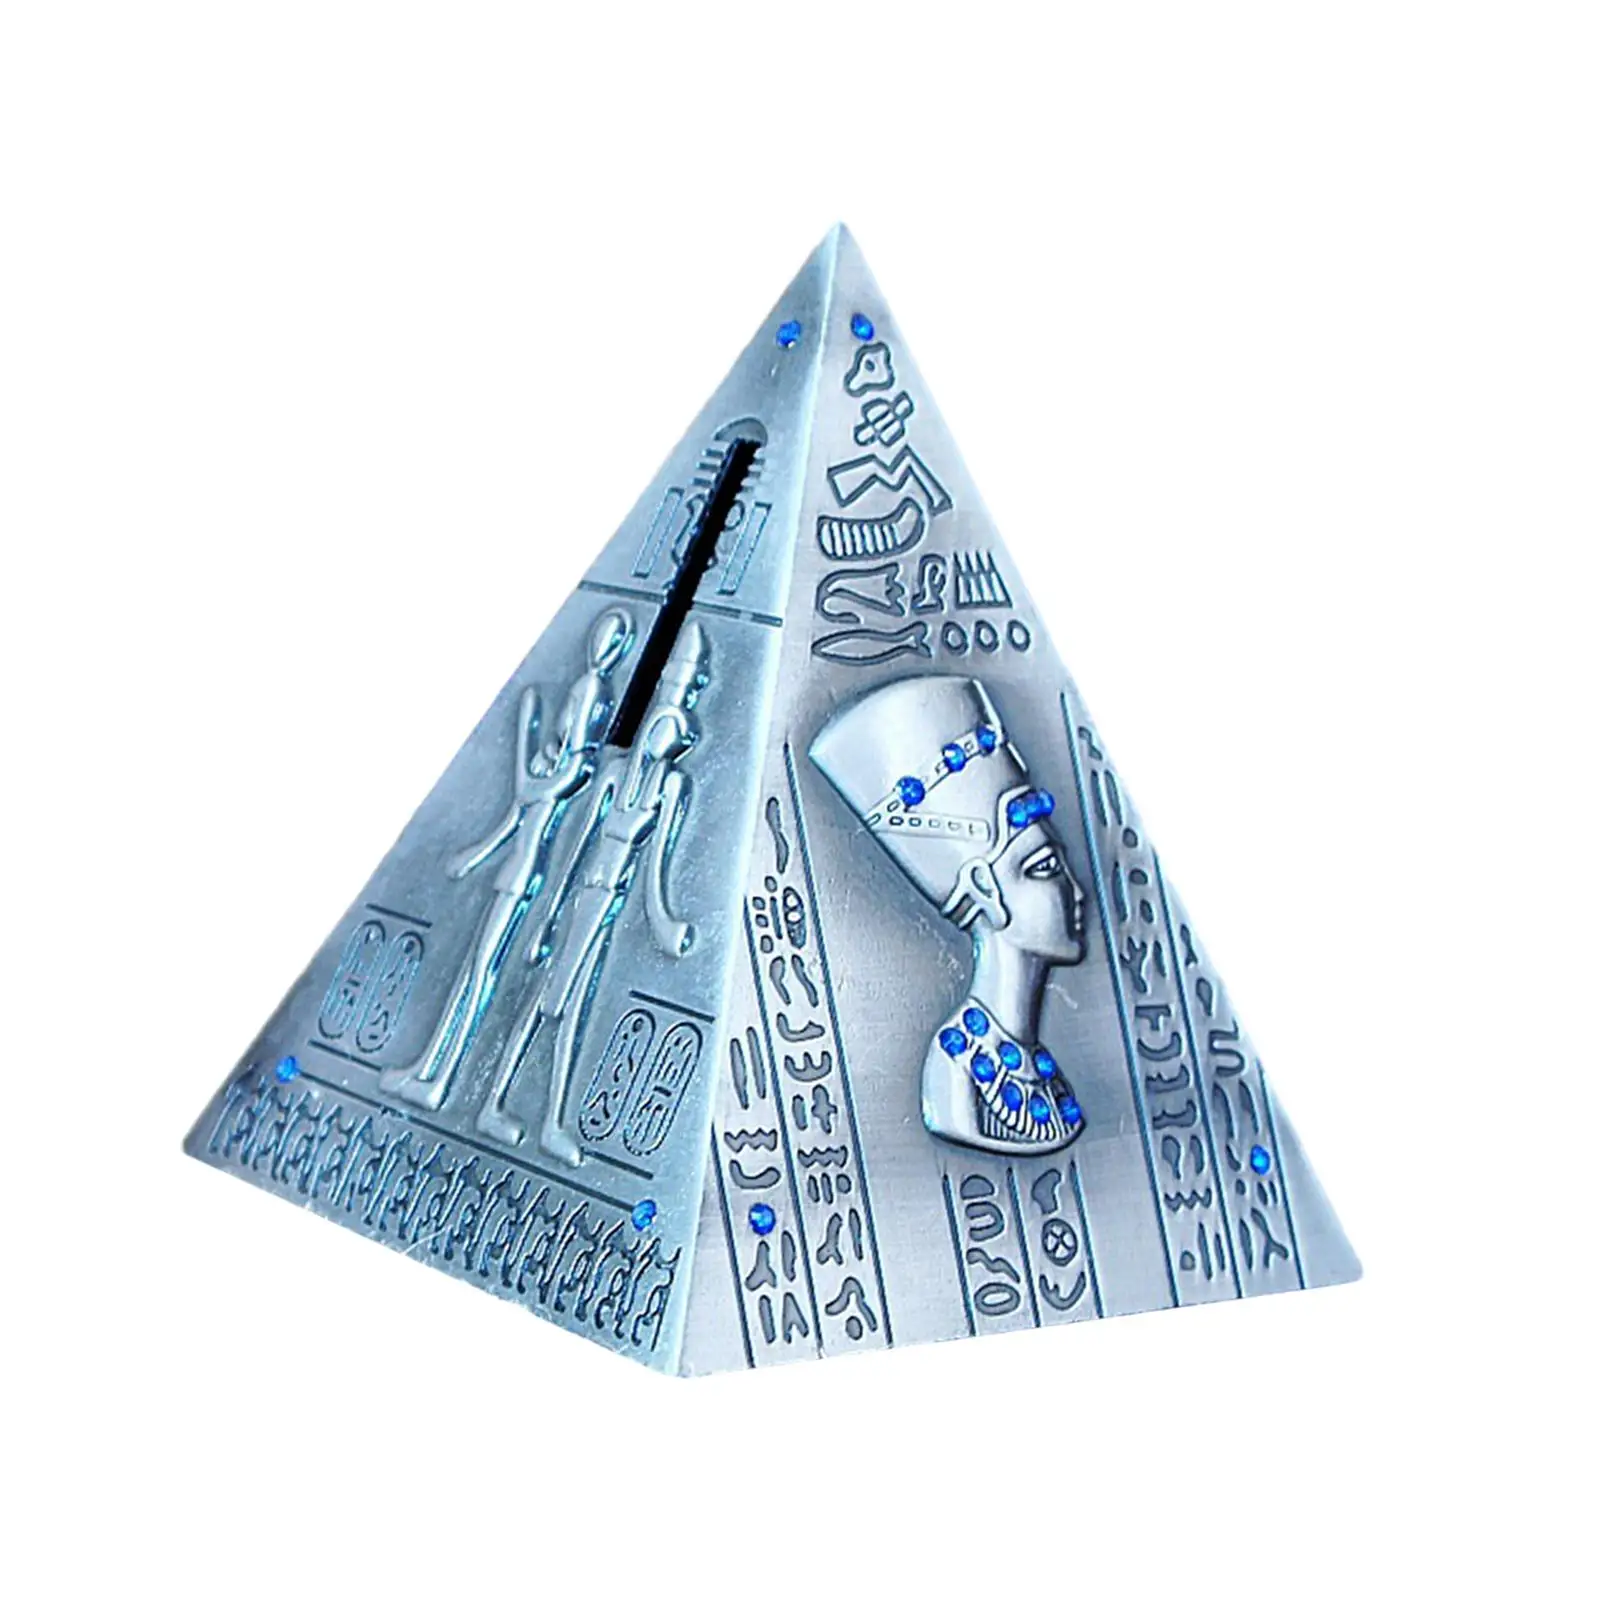 Pyramid Box Crafts Keepsake Decoration Container Money Saving Box Change Banks for Holiday Kids and Adults Party